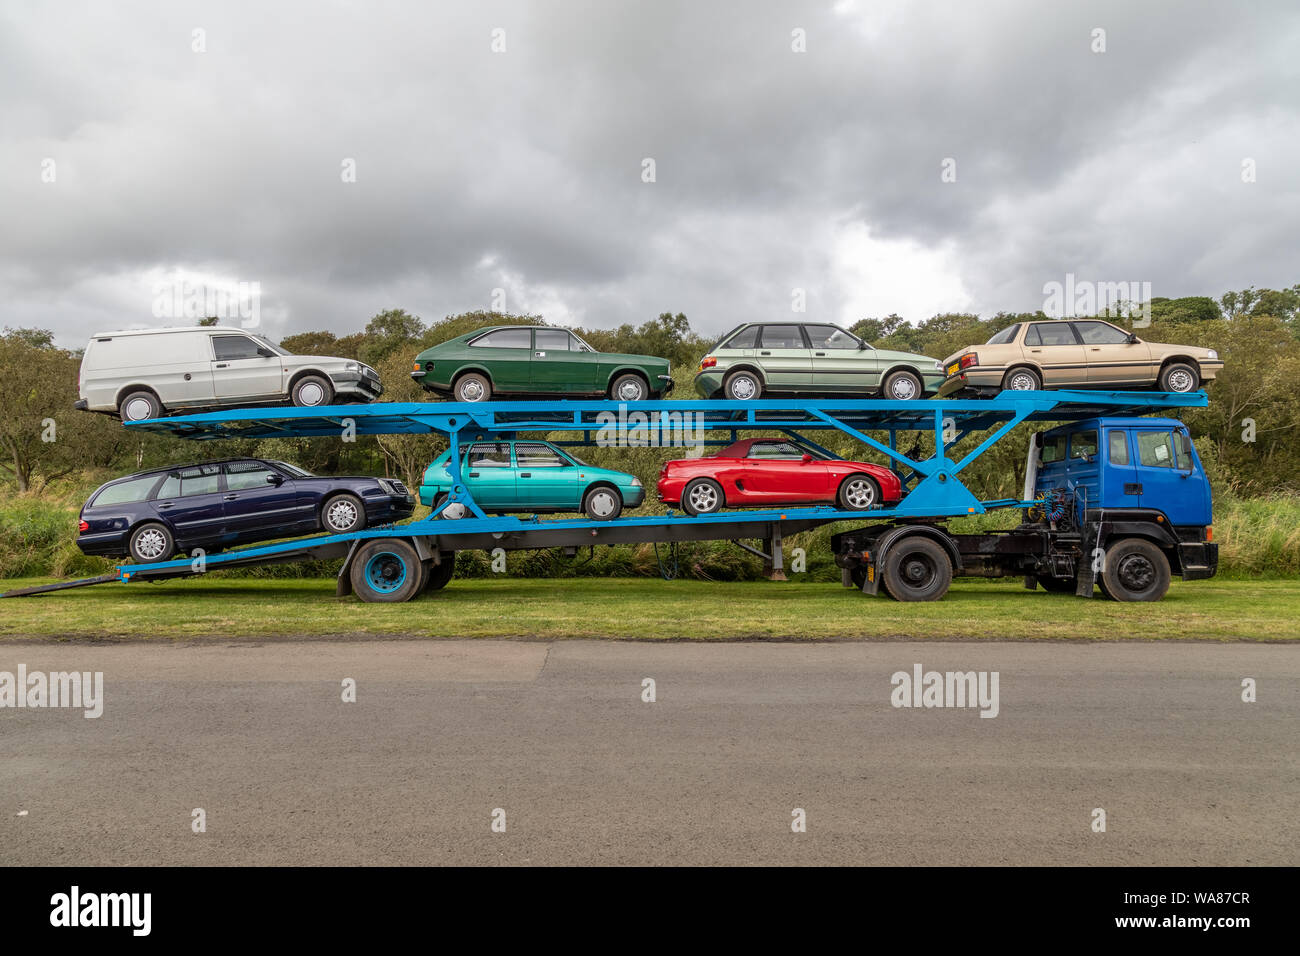 A selection of cars from the 1970's and 1980's on a Leyland 300 car transporter lorry. This vehicle is on display at the Scottish Vintage Bus Museum Stock Photo